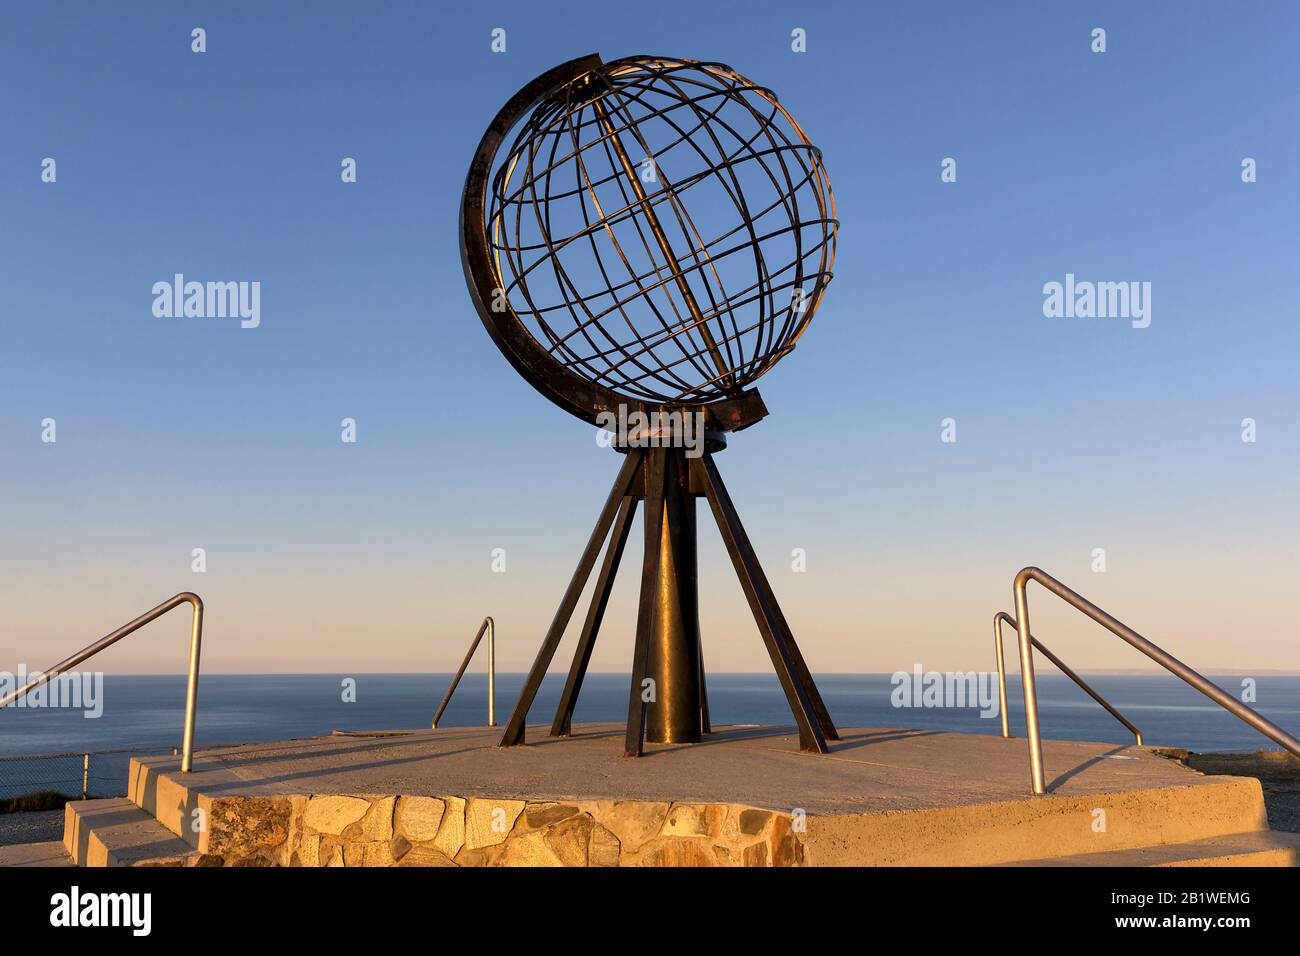 Nordkapp, Norway:  Northern point of Europe with globe sculpture at sunset Stock Photo